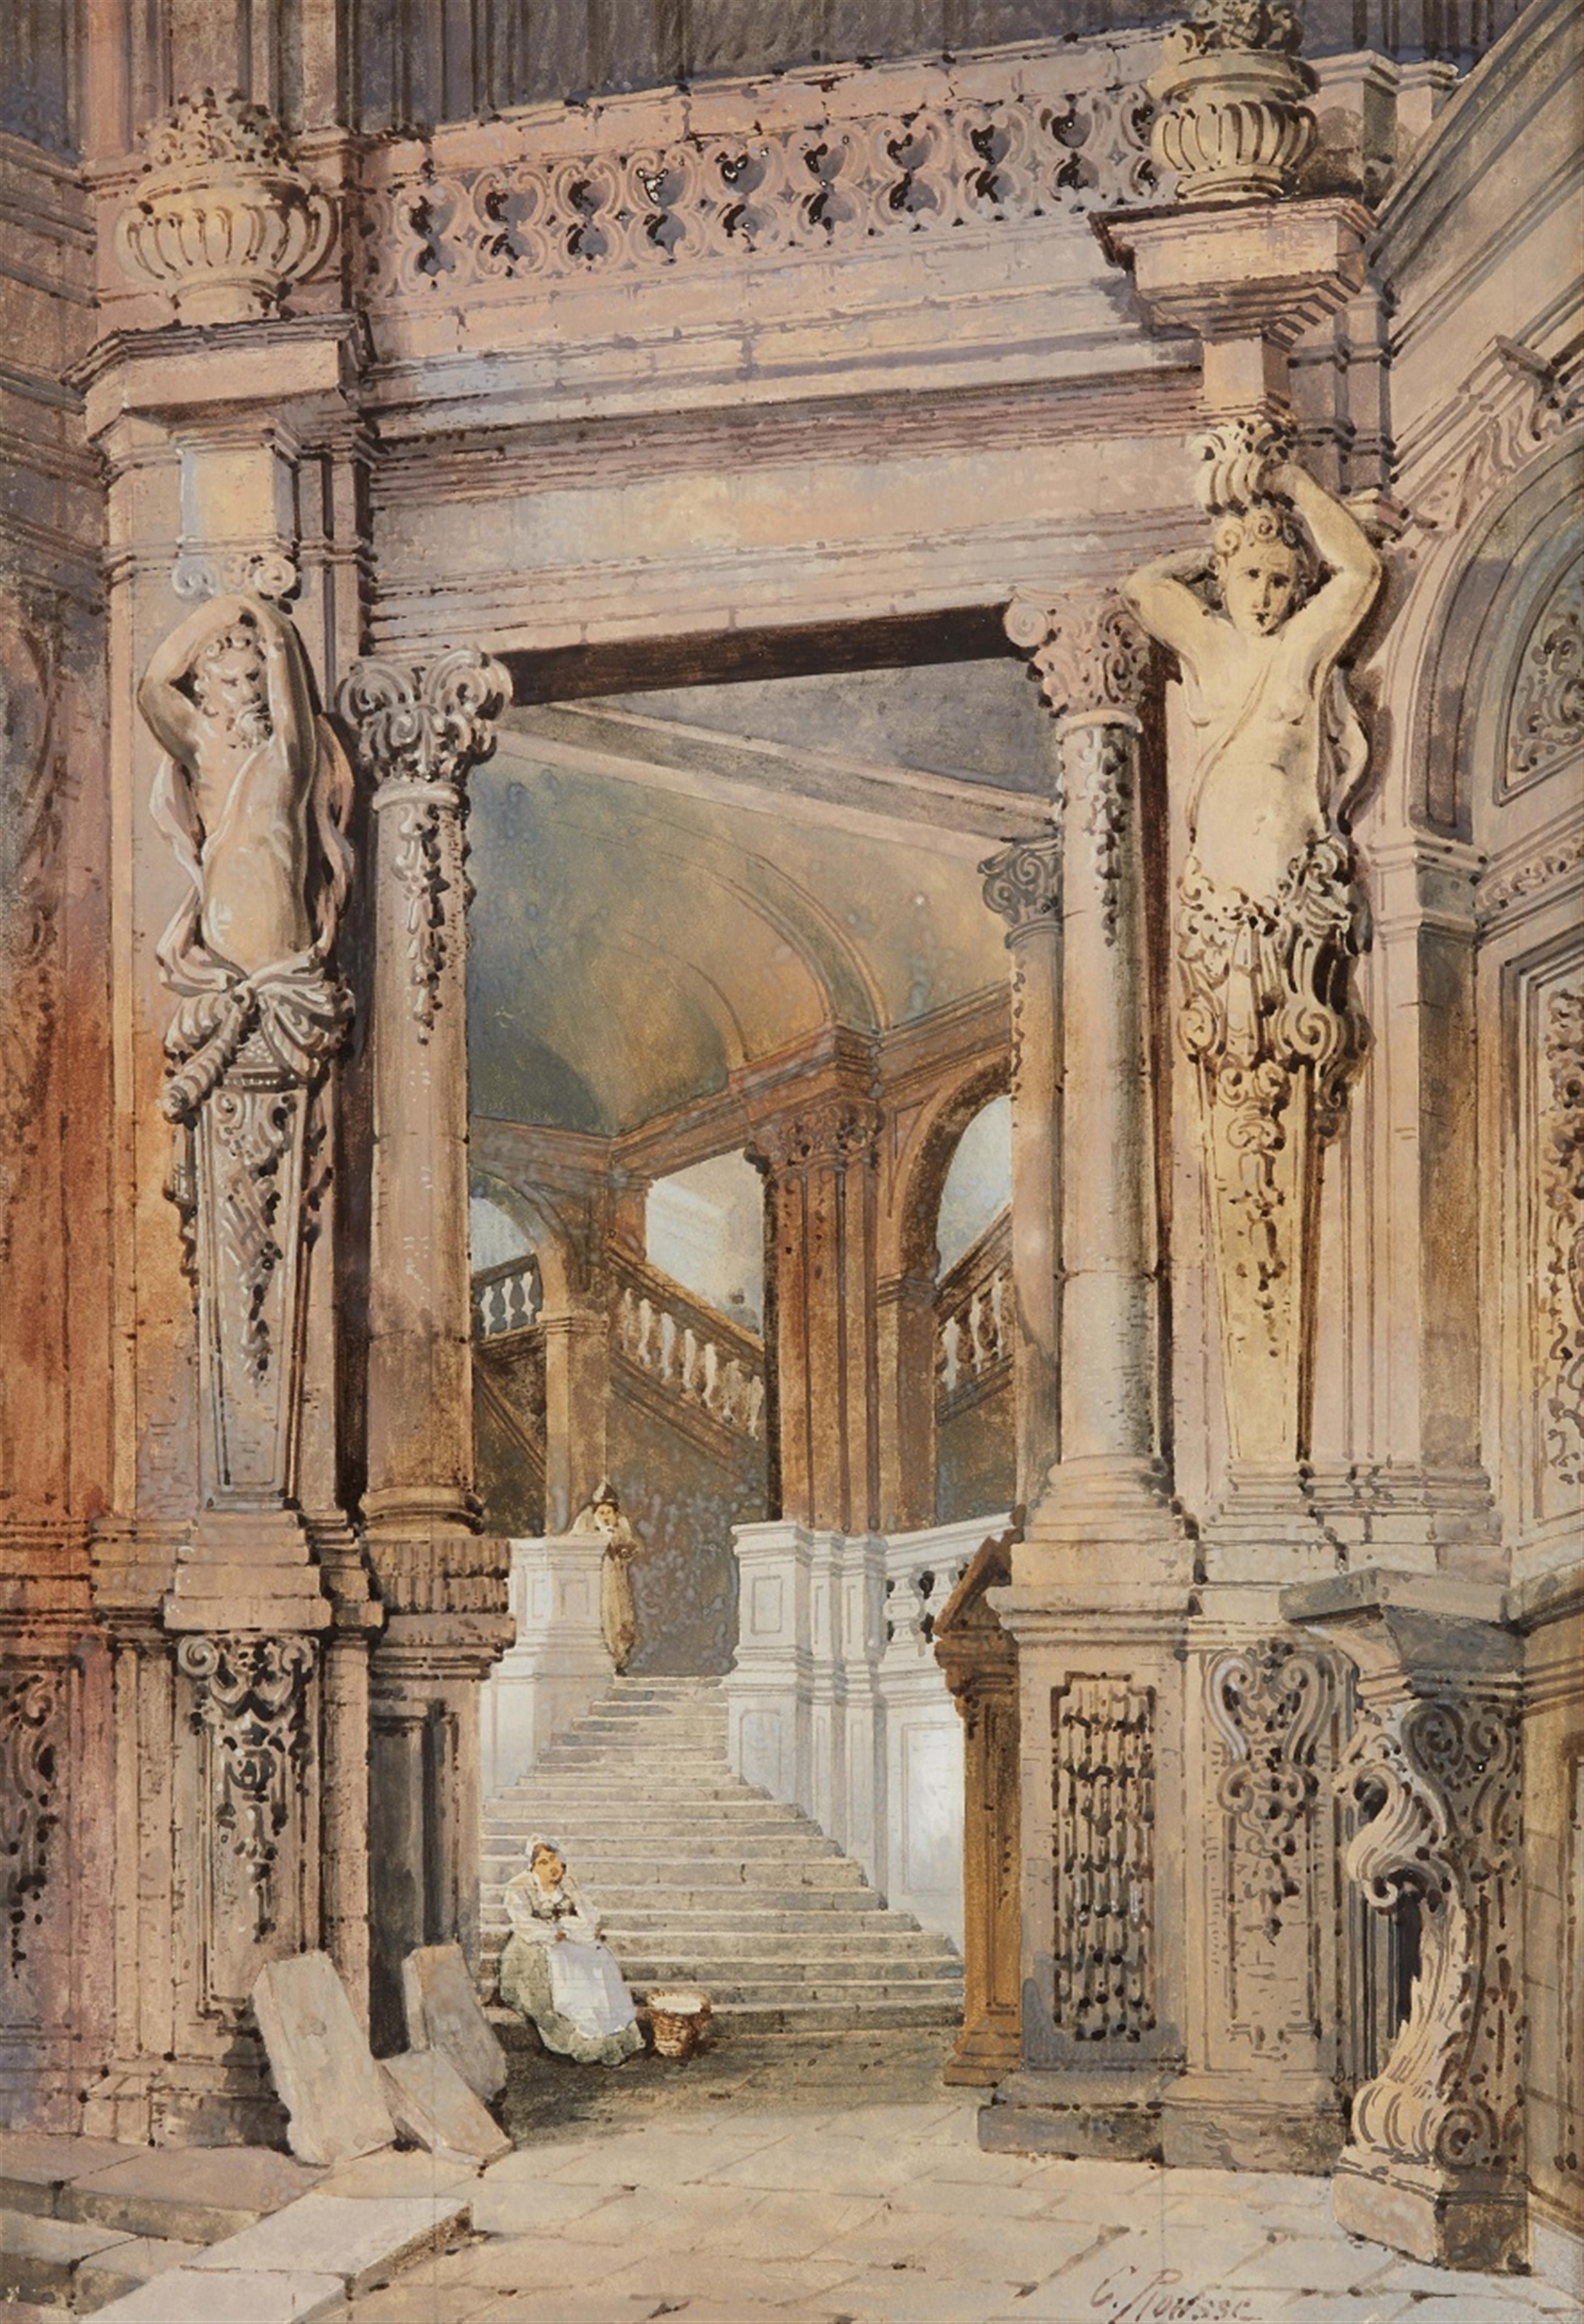 Charles Rousse - The Staircase in the Wallpavillon of the Zwinger in Dresden